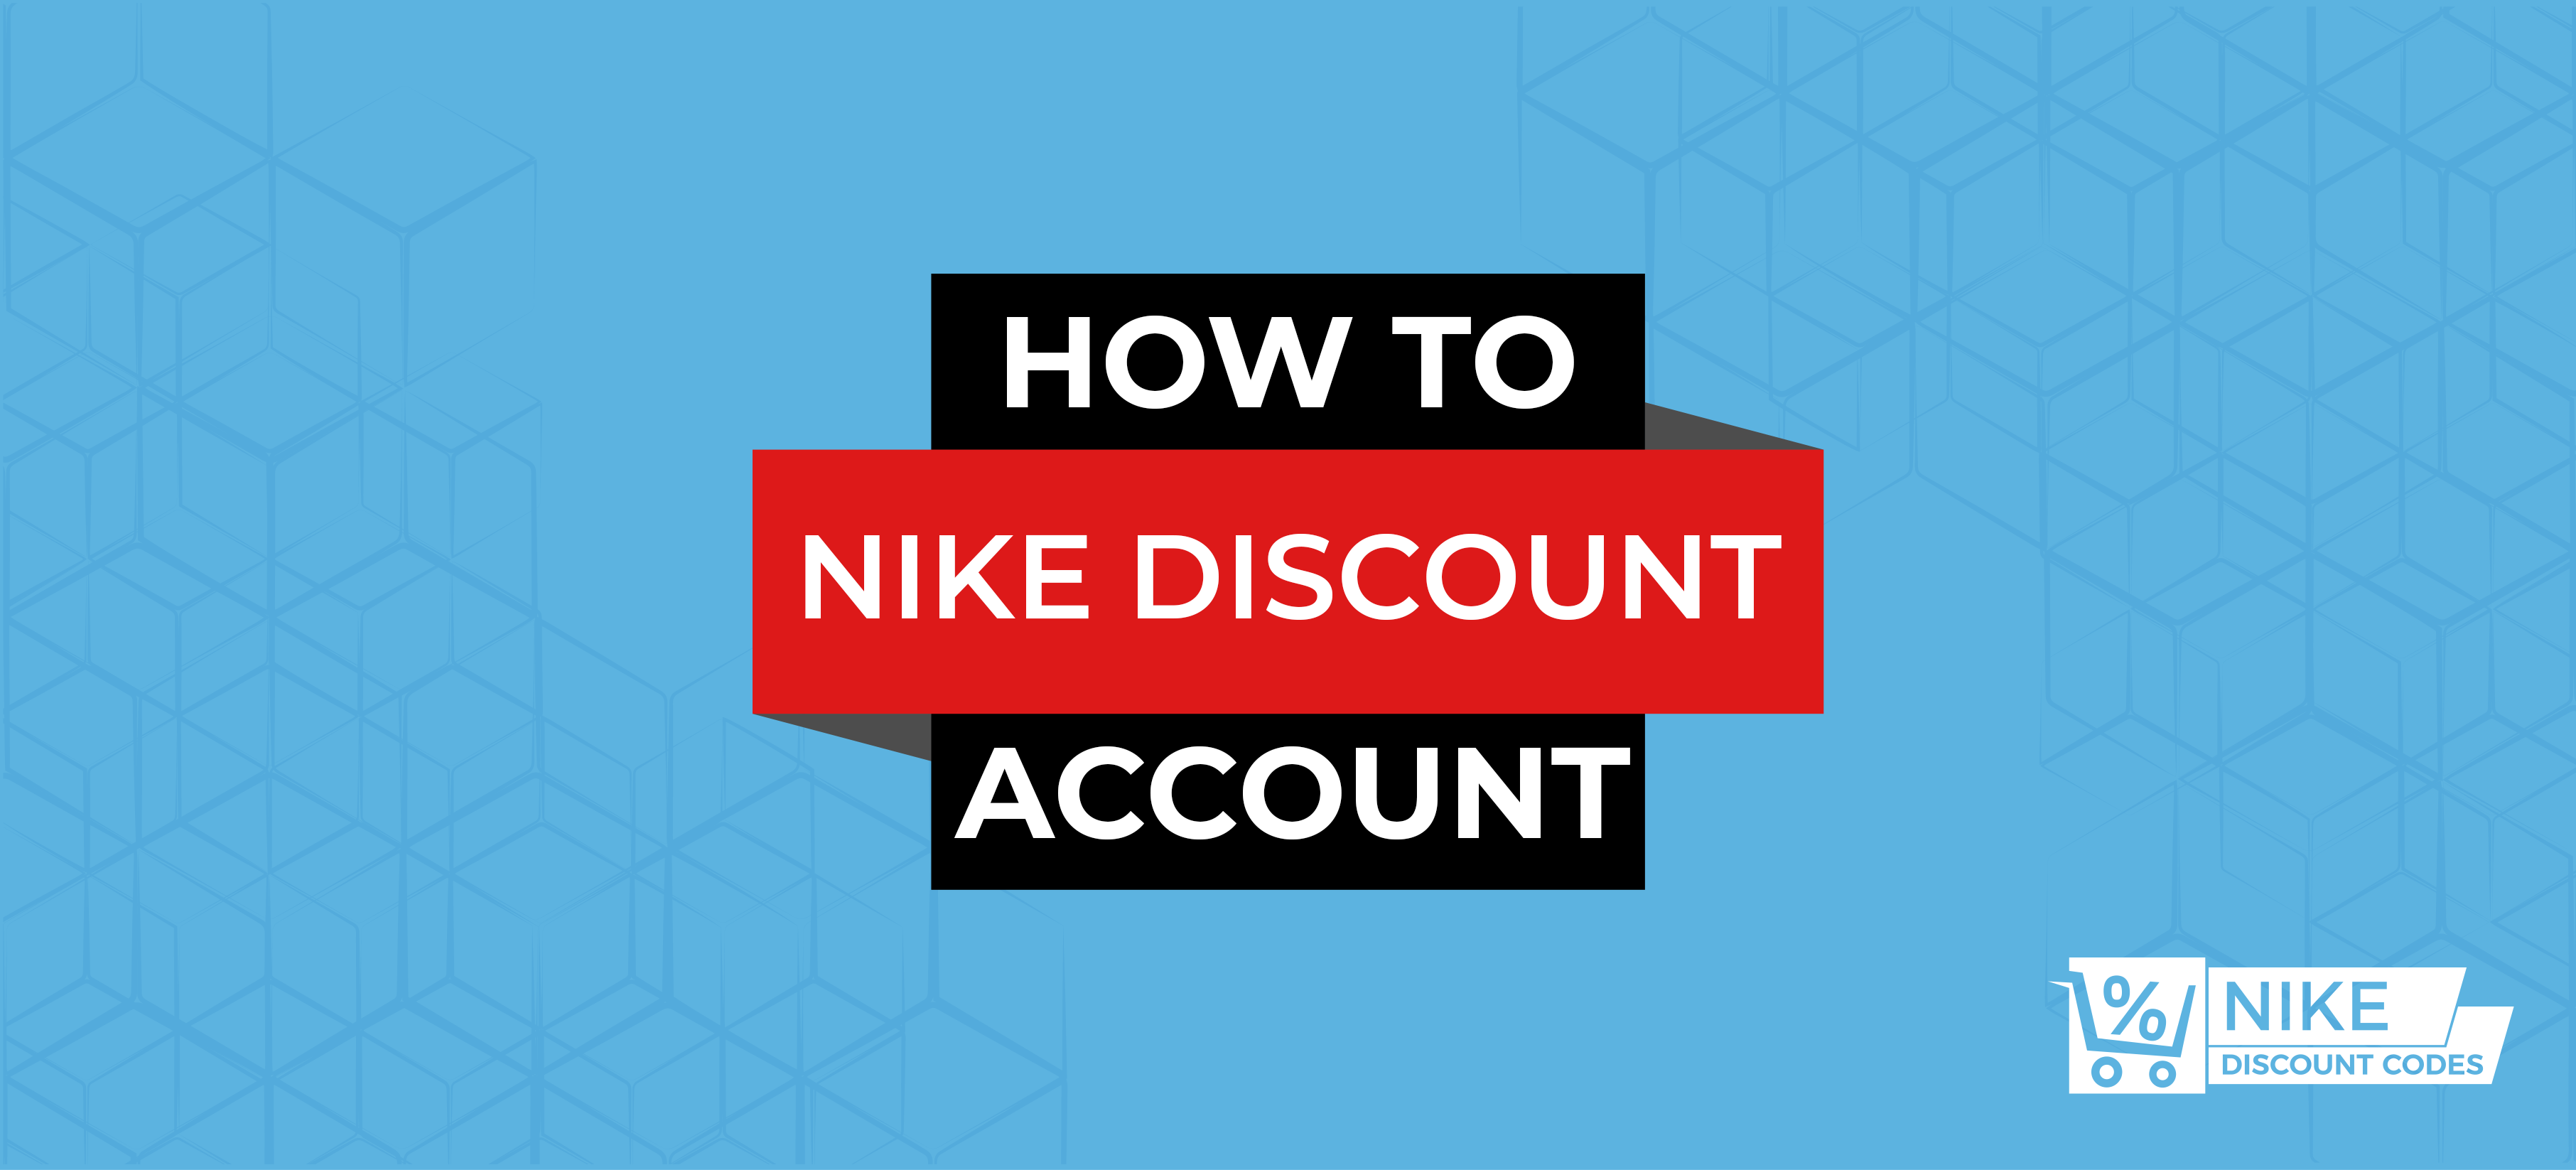 How to use a Nike Discount Account Nike Discount Codes